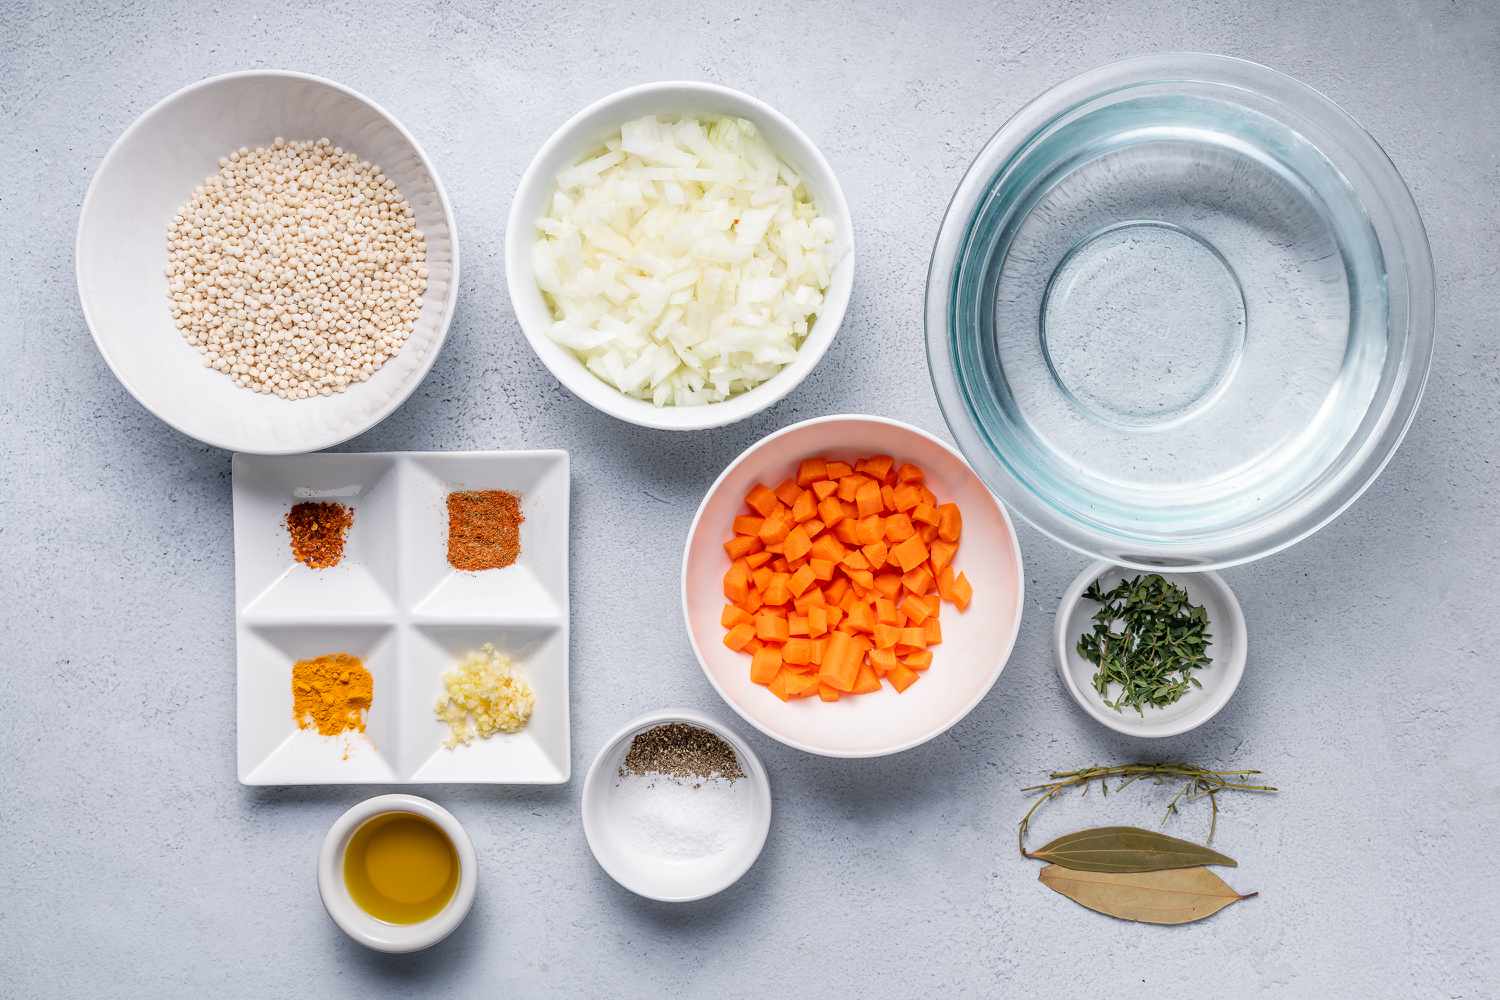 Ingredients to make toasted pasta soup